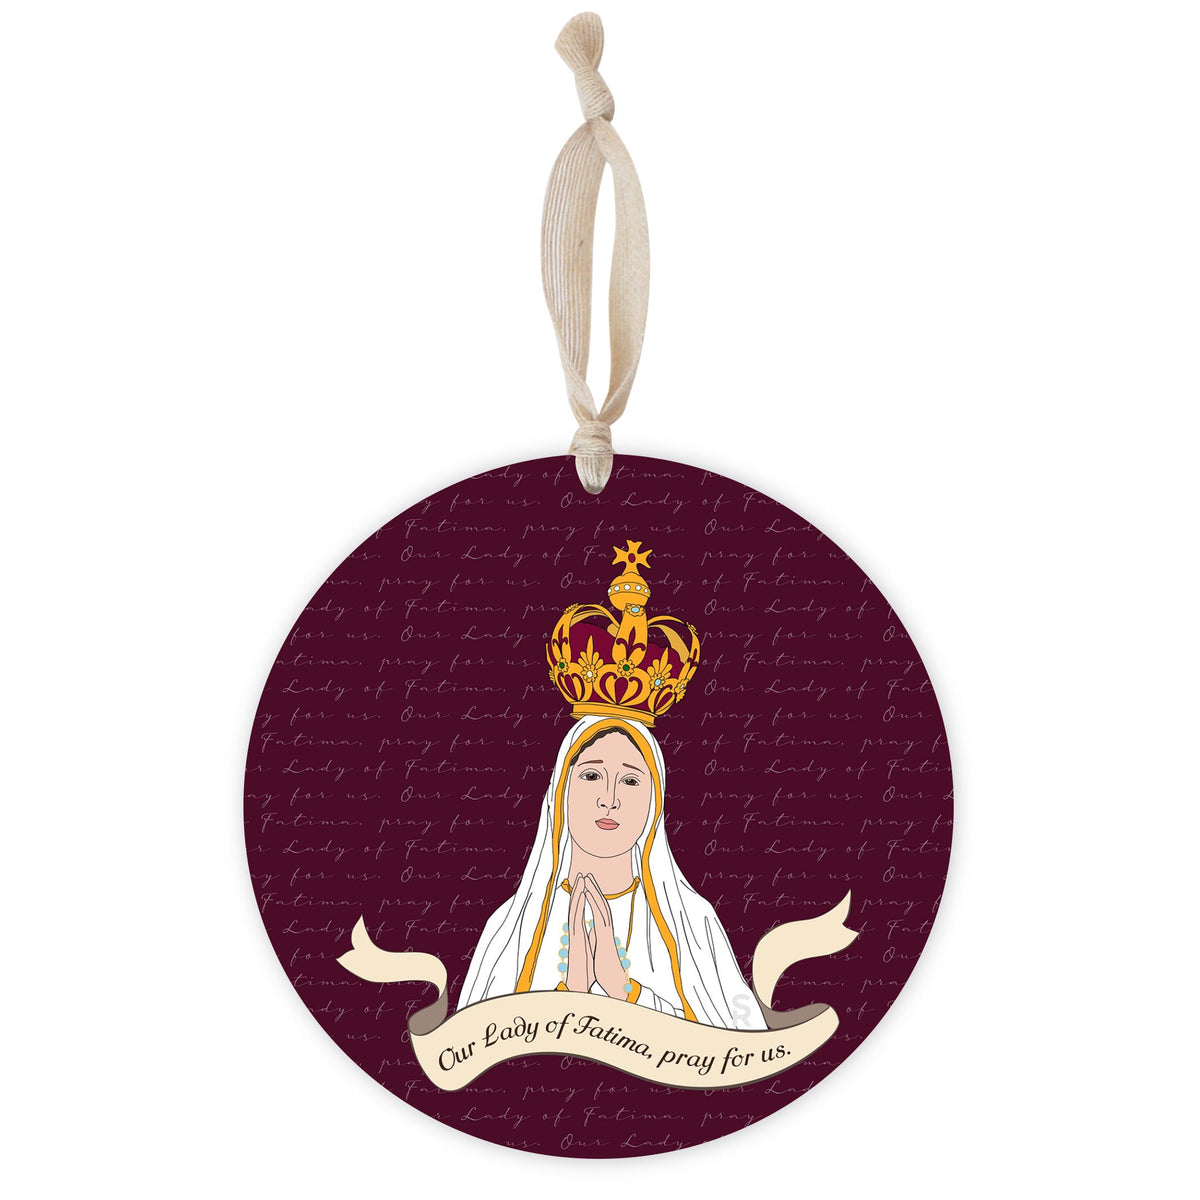 Our Lady of Fatima Round 8 inch Hanging Wood Plaque